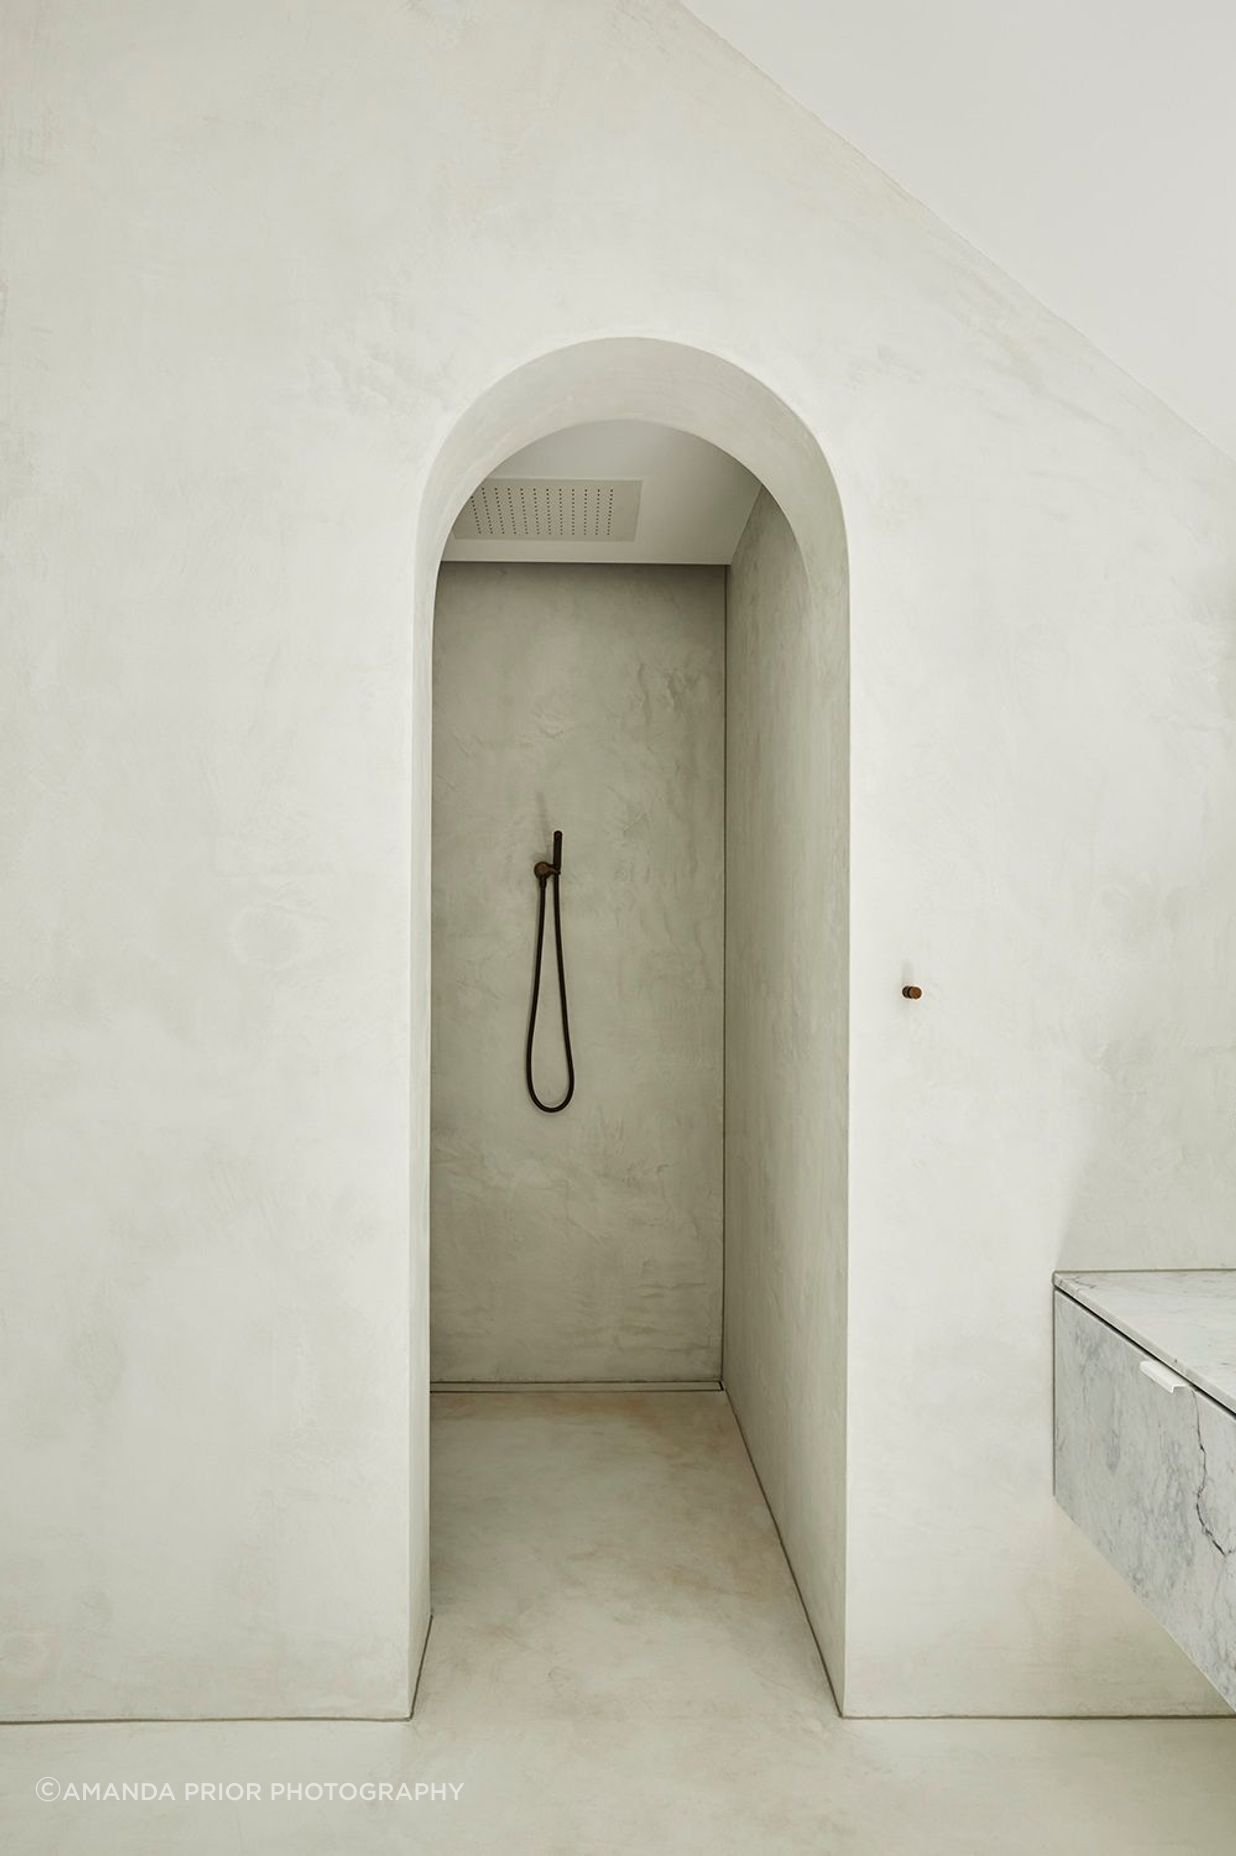 An archway entry adds drama to the master walk-in shower.